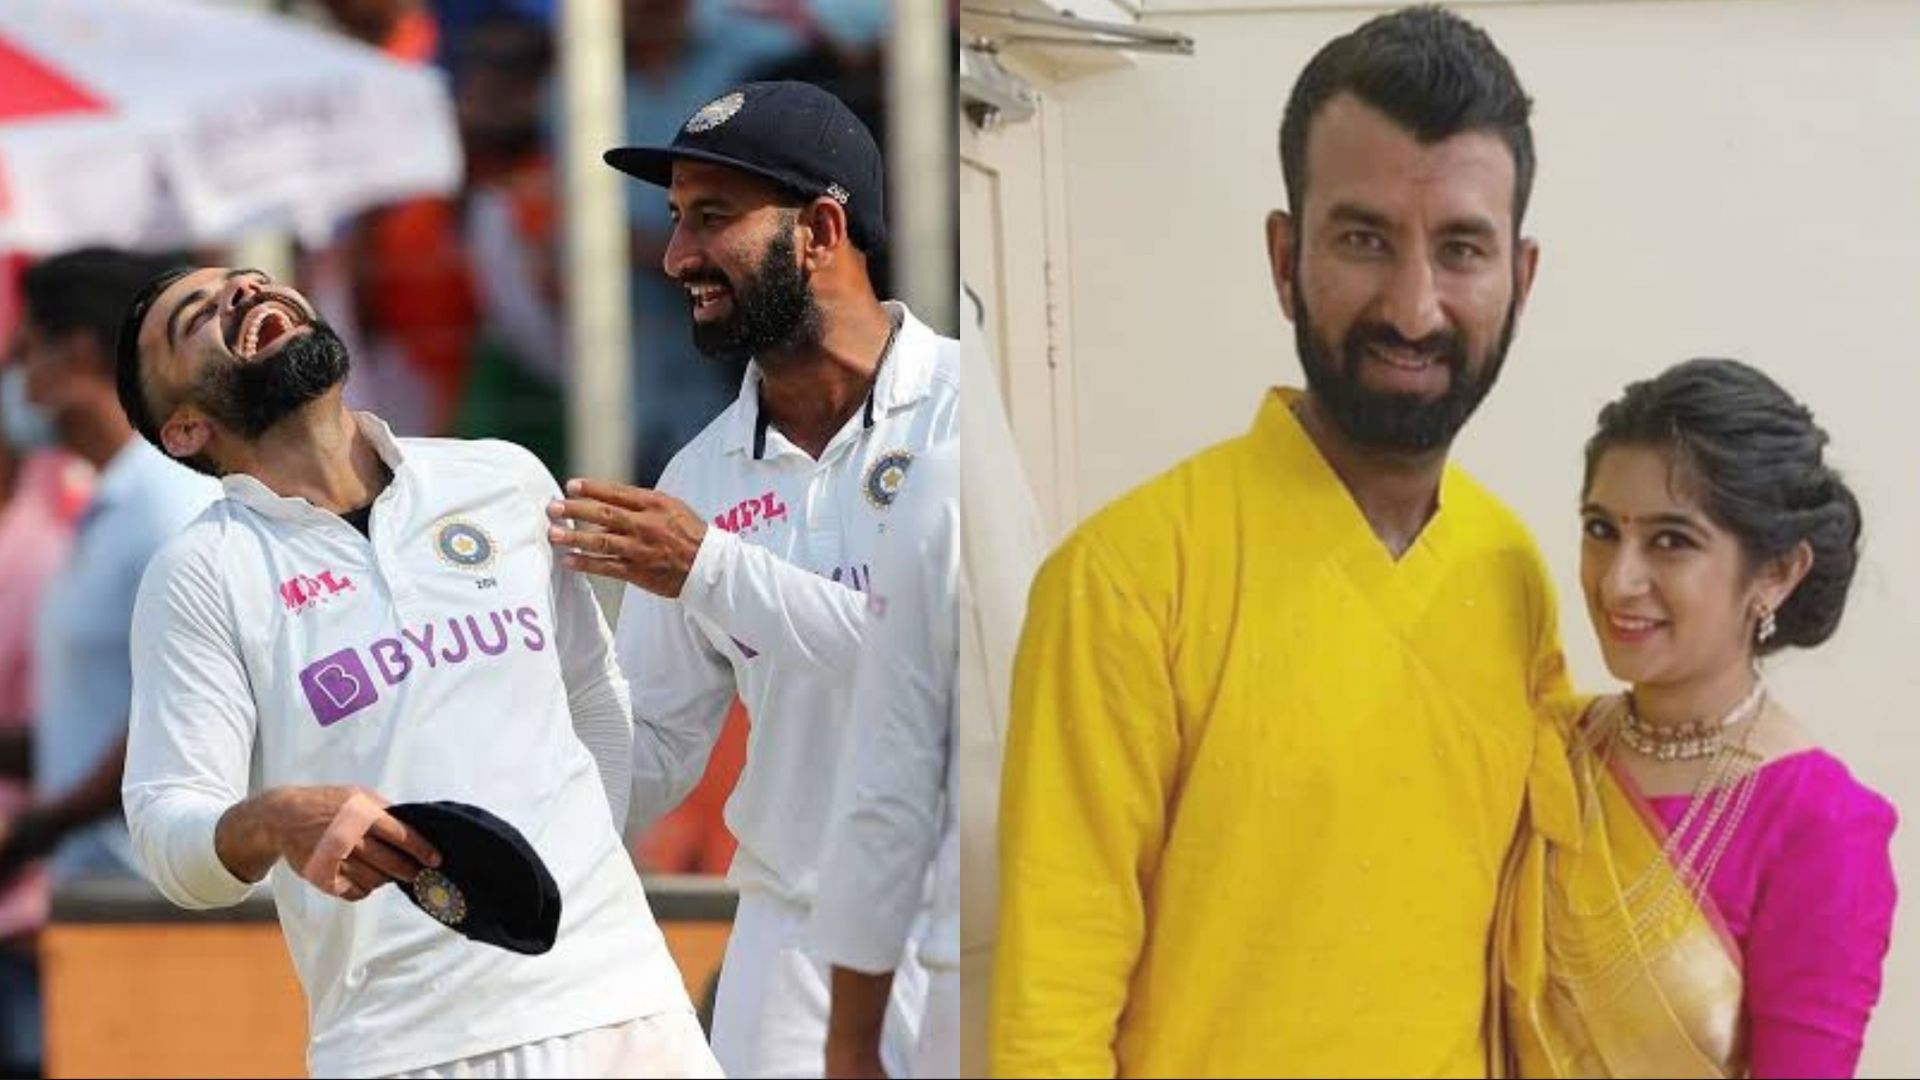 Virat Kohli made a hilarious comment about Cheteshwar Pujara a few years ago. (Image: Instagram)